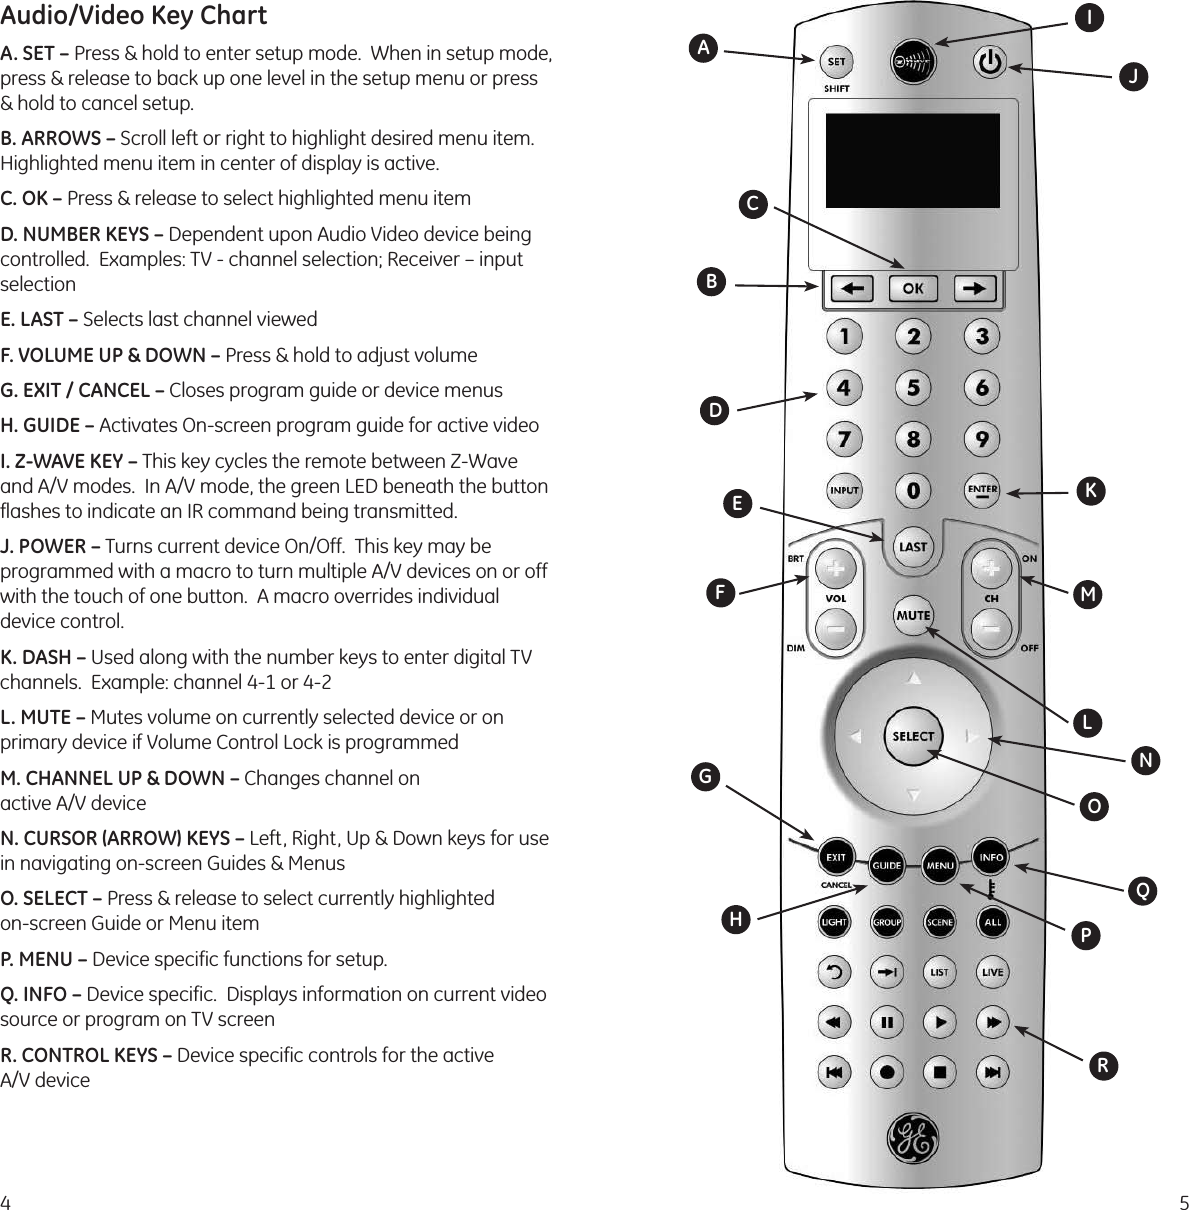 45Audio/Video Key ChartA. SET – Press &amp; hold to enter setup mode.  When in setup mode, press &amp; release to back up one level in the setup menu or press  &amp; hold to cancel setup.B. ARROWS – Scroll left or right to highlight desired menu item.  Highlighted menu item in center of display is active.C. OK – Press &amp; release to select highlighted menu itemD. NUMBER KEYS – Dependent upon Audio Video device being controlled.  Examples: TV - channel selection; Receiver – input selectionE. LAST – Selects last channel viewedF. VOLUME UP &amp; DOWN – Press &amp; hold to adjust volumeG. EXIT / CANCEL – Closes program guide or device menusH. GUIDE – Activates On-screen program guide for active videoI. Z-WAVE KEY – This key cycles the remote between Z-Wave and A/V modes.  In A/V mode, the green LED beneath the button flashes to indicate an IR command being transmitted.J. POWER – Turns current device On/Off.  This key may be  programmed with a macro to turn multiple A/V devices on or off with the touch of one button.  A macro overrides individual  device control.K. DASH – Used along with the number keys to enter digital TV channels.  Example: channel 4-1 or 4-2L. MUTE – Mutes volume on currently selected device or on  primary device if Volume Control Lock is programmedM. CHANNEL UP &amp; DOWN – Changes channel on  active A/V deviceN. CURSOR (ARROW) KEYS – Left, Right, Up &amp; Down keys for use  in navigating on-screen Guides &amp; MenusO. SELECT – Press &amp; release to select currently highlighted  on-screen Guide or Menu itemP. MENU – Device specific functions for setup.Q. INFO – Device specific.  Displays information on current video source or program on TV screenR. CONTROL KEYS – Device specific controls for the active  A/V device ABCDEFGHIJKLMNOPQR